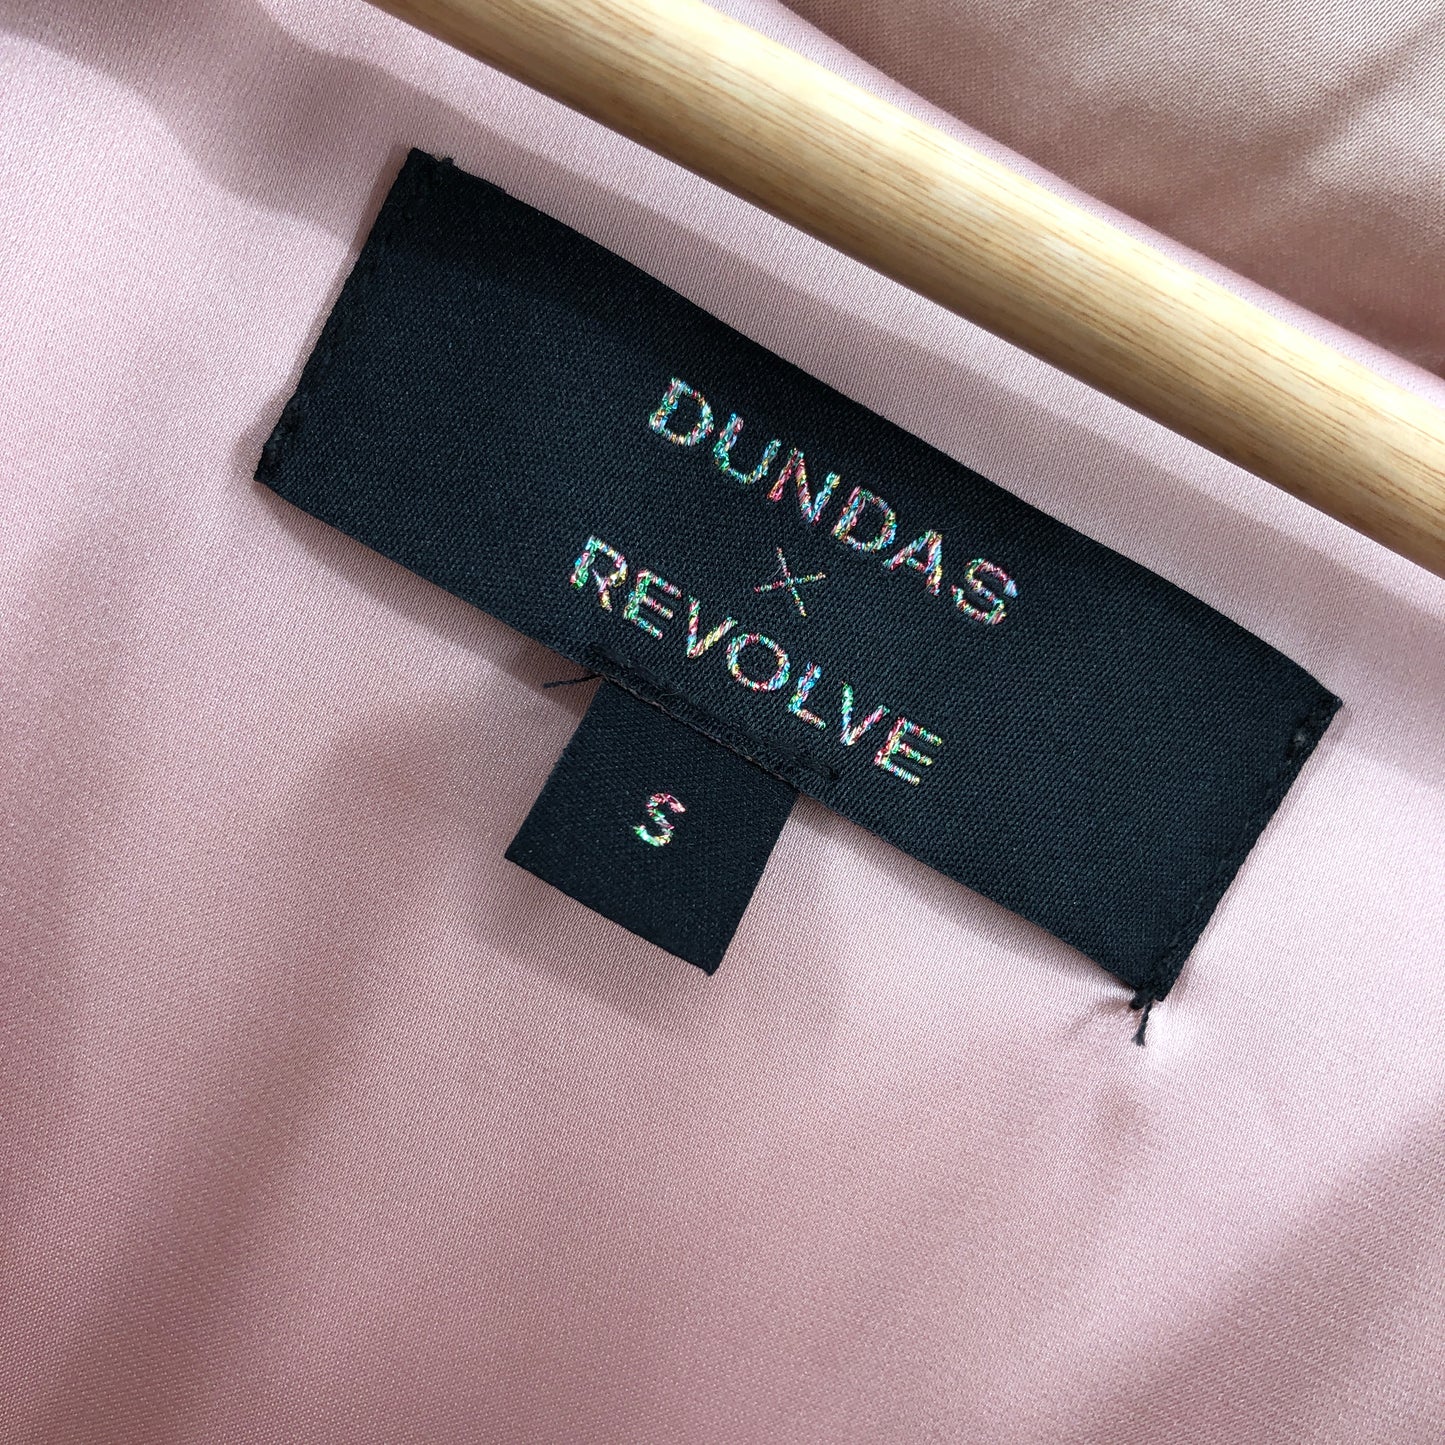 DUNDAS x REVOLVE Bride Audrey Puffer Jacket in Blush Upcycled / Repaired